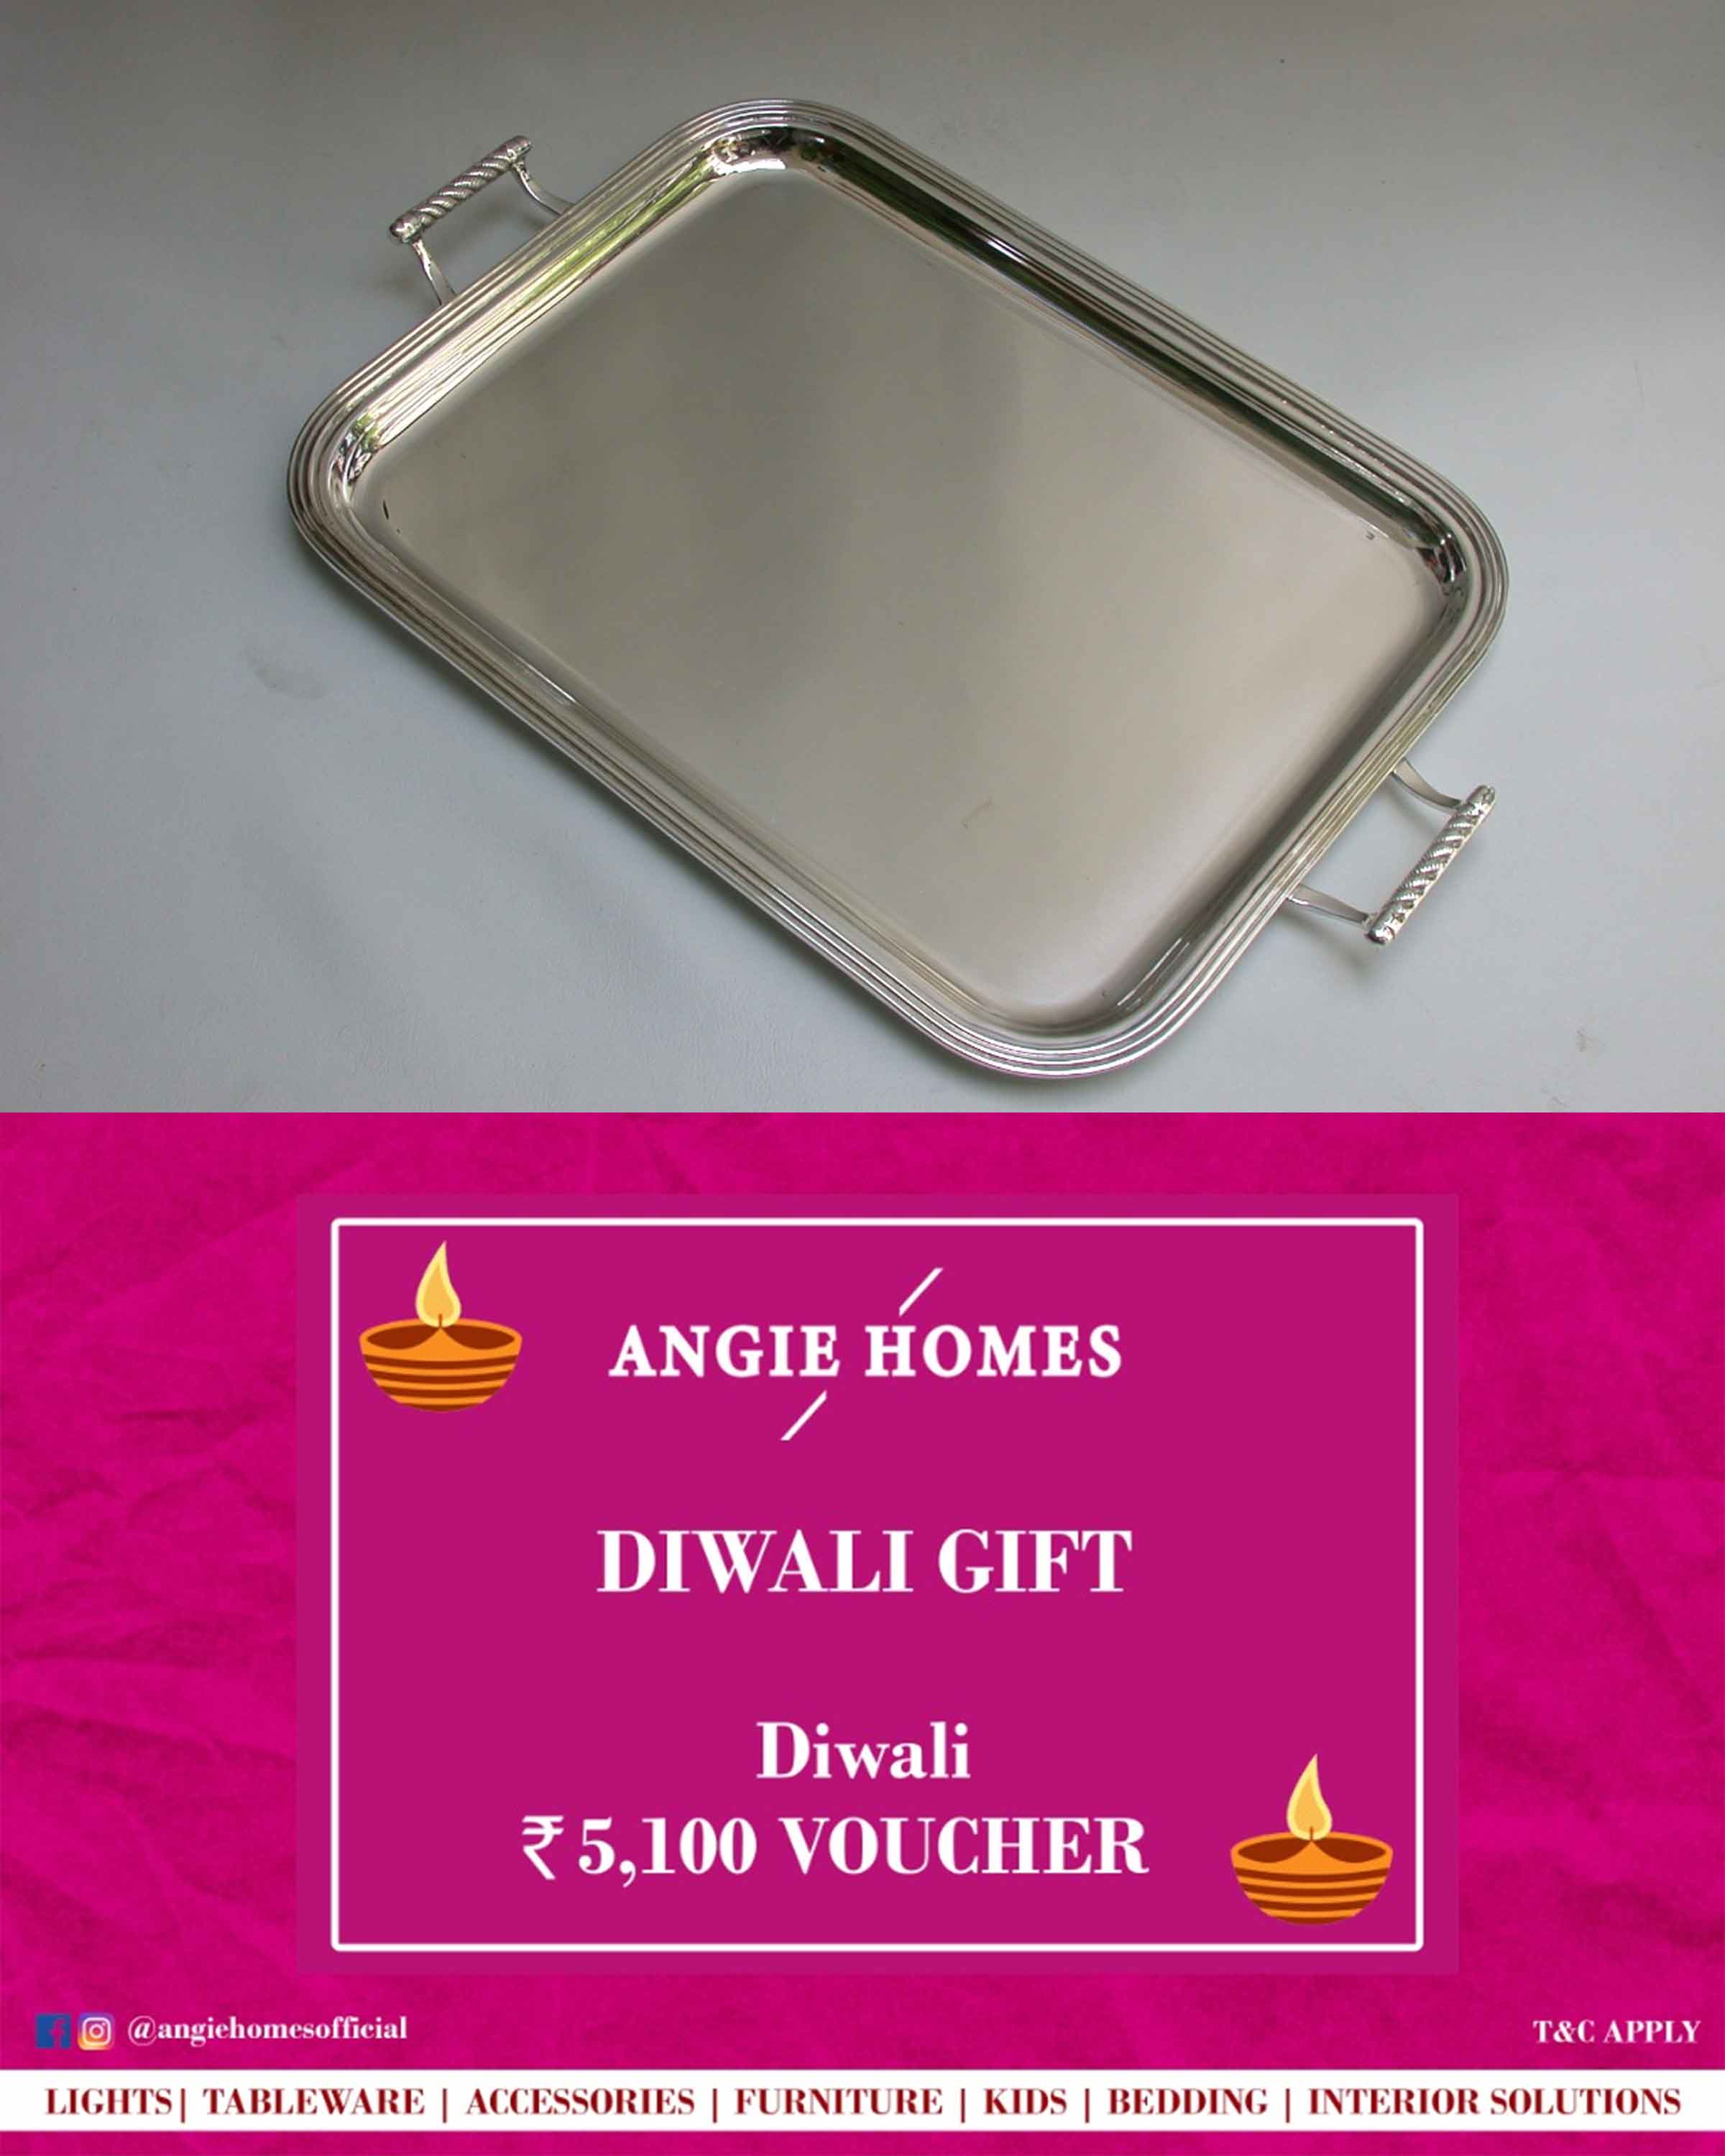 Online Diwali Gift Card Voucher for Silver Plated Tray | Silverware ANGIE HOMES